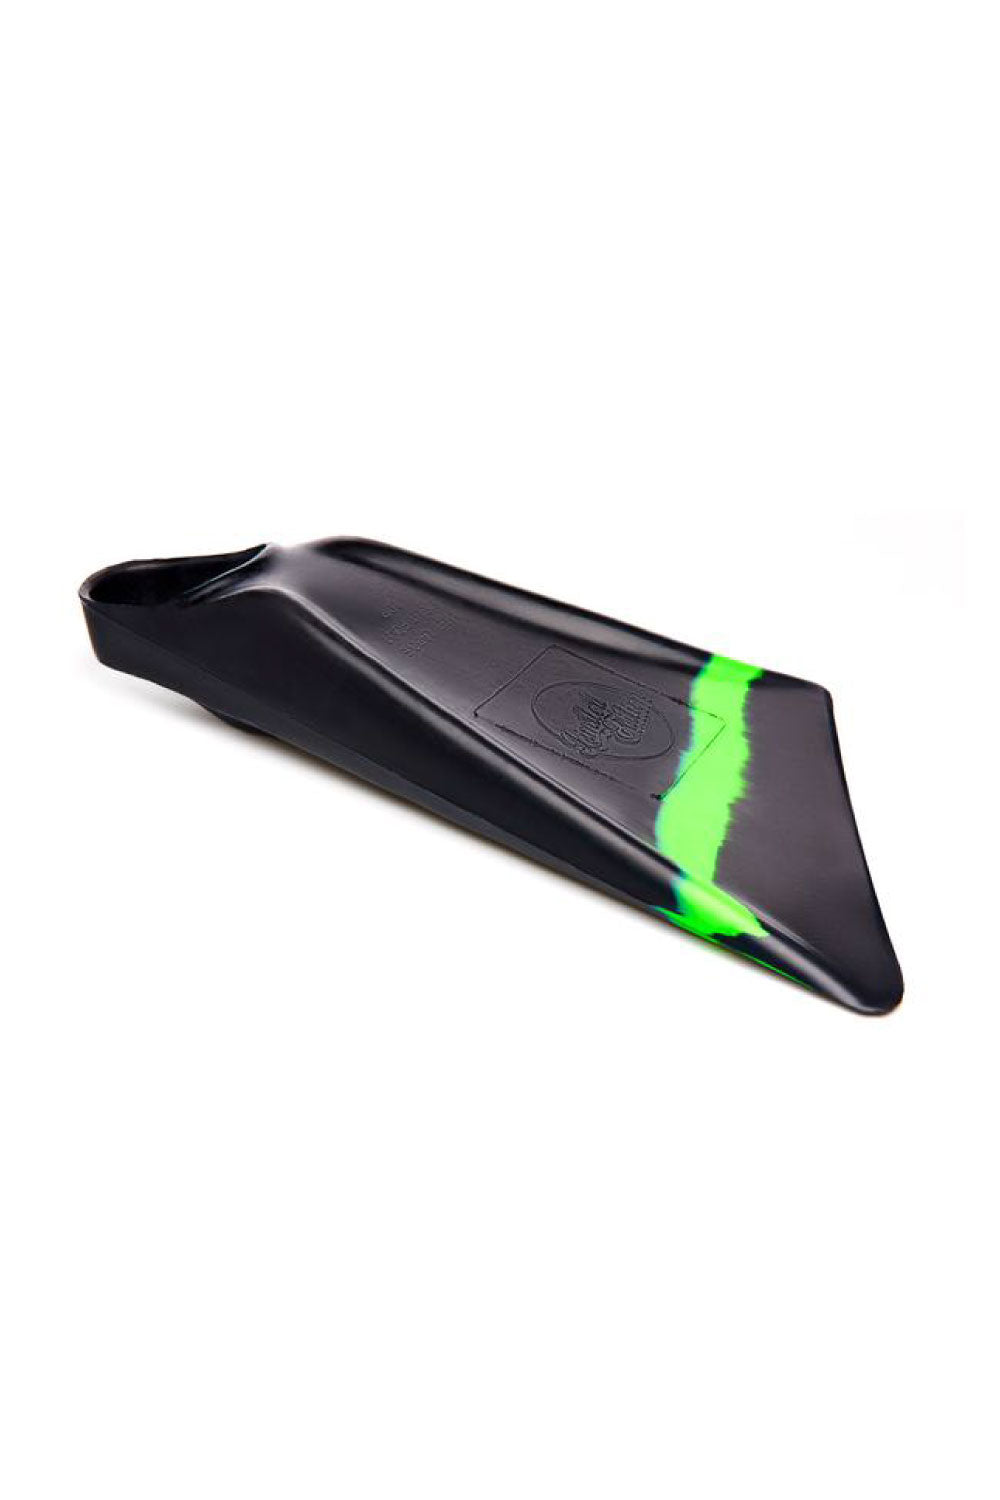 Sylock Limited Edition Bodyboard Flippers